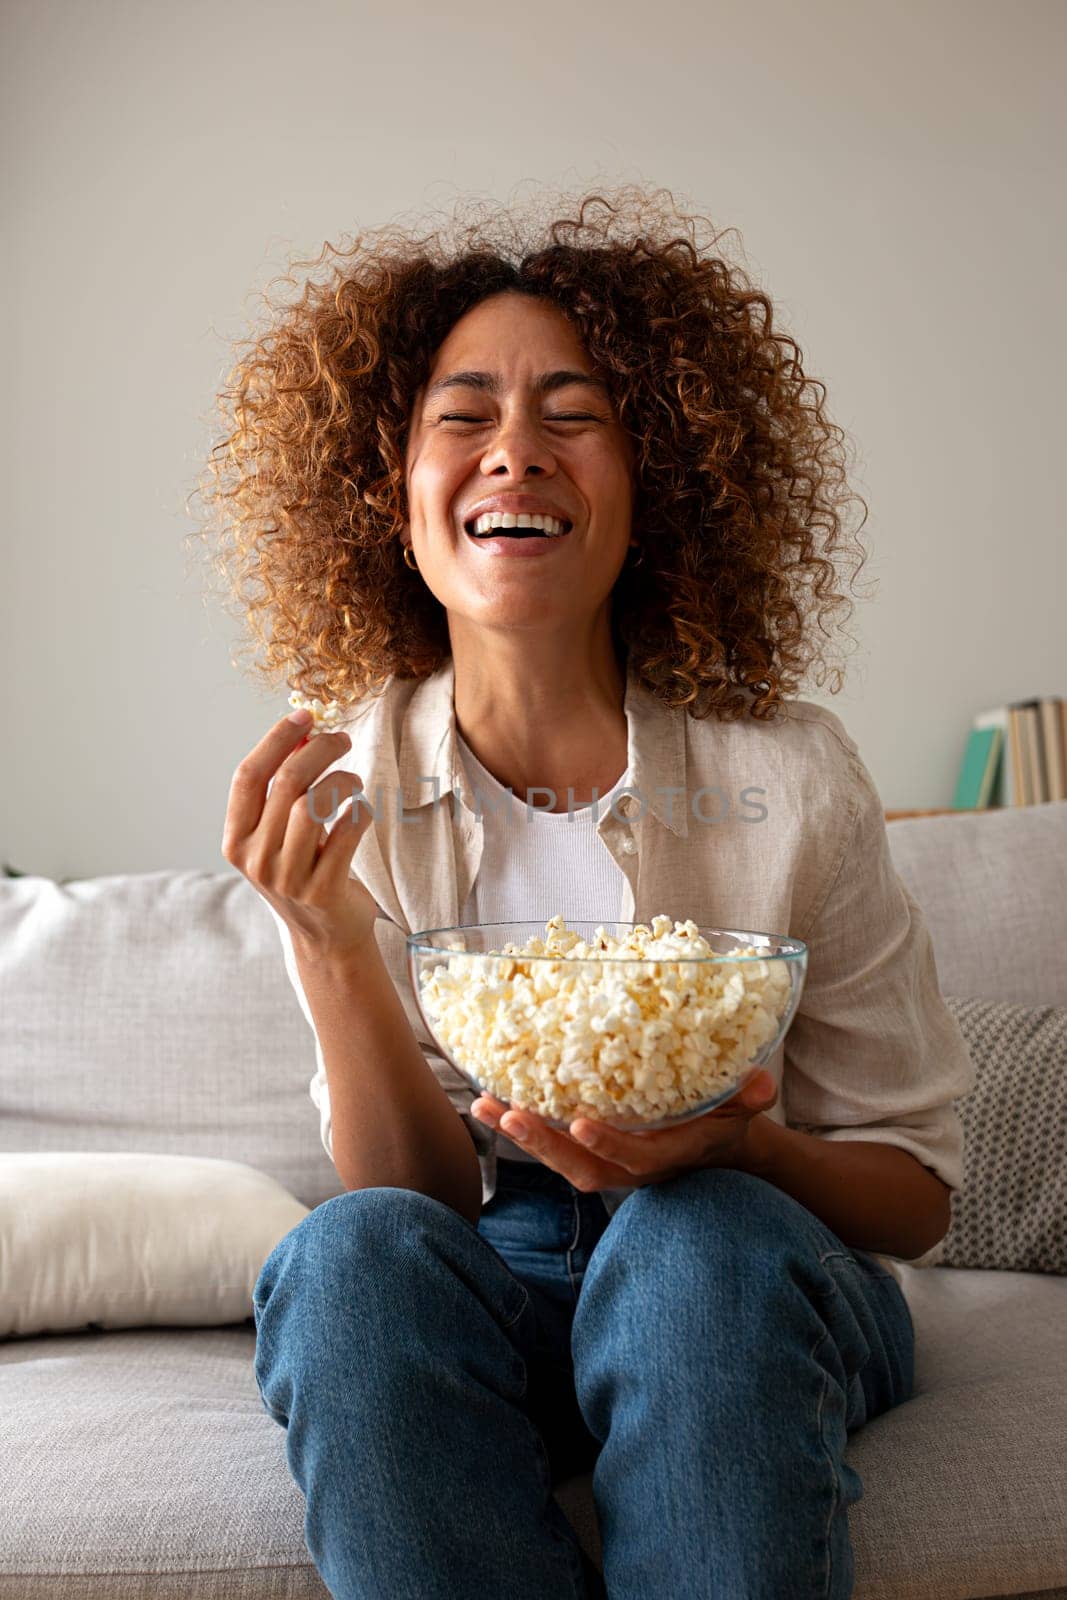 Vertical portrait of young multiracial hispanic woman laughing watching tv at home sitting on the sofa eating popcorn. Leisure activity and lifestyle concept.